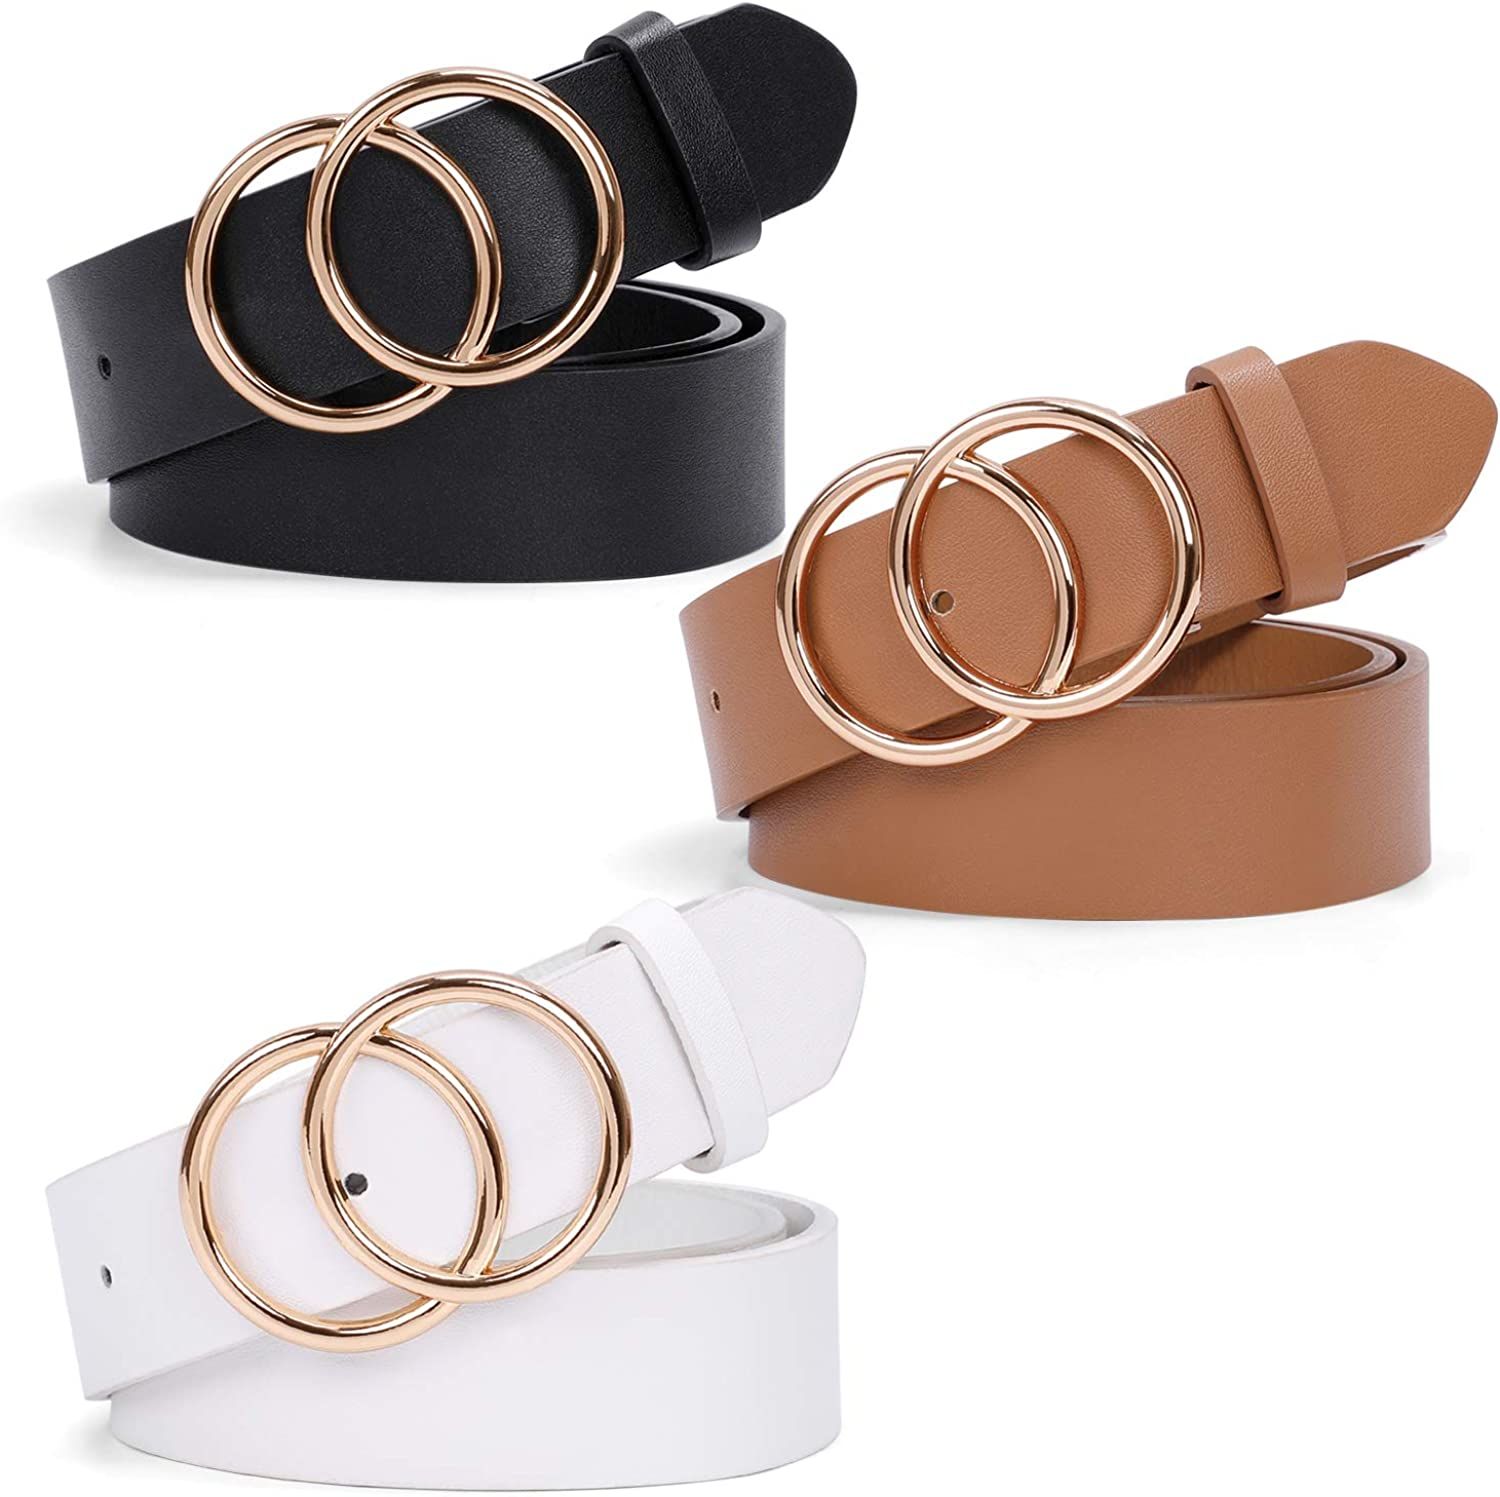 Women Leather Belt Fashion Double O-Ring Soft Faux Leather Waist Belts For Jeans Dress | Amazon (US)